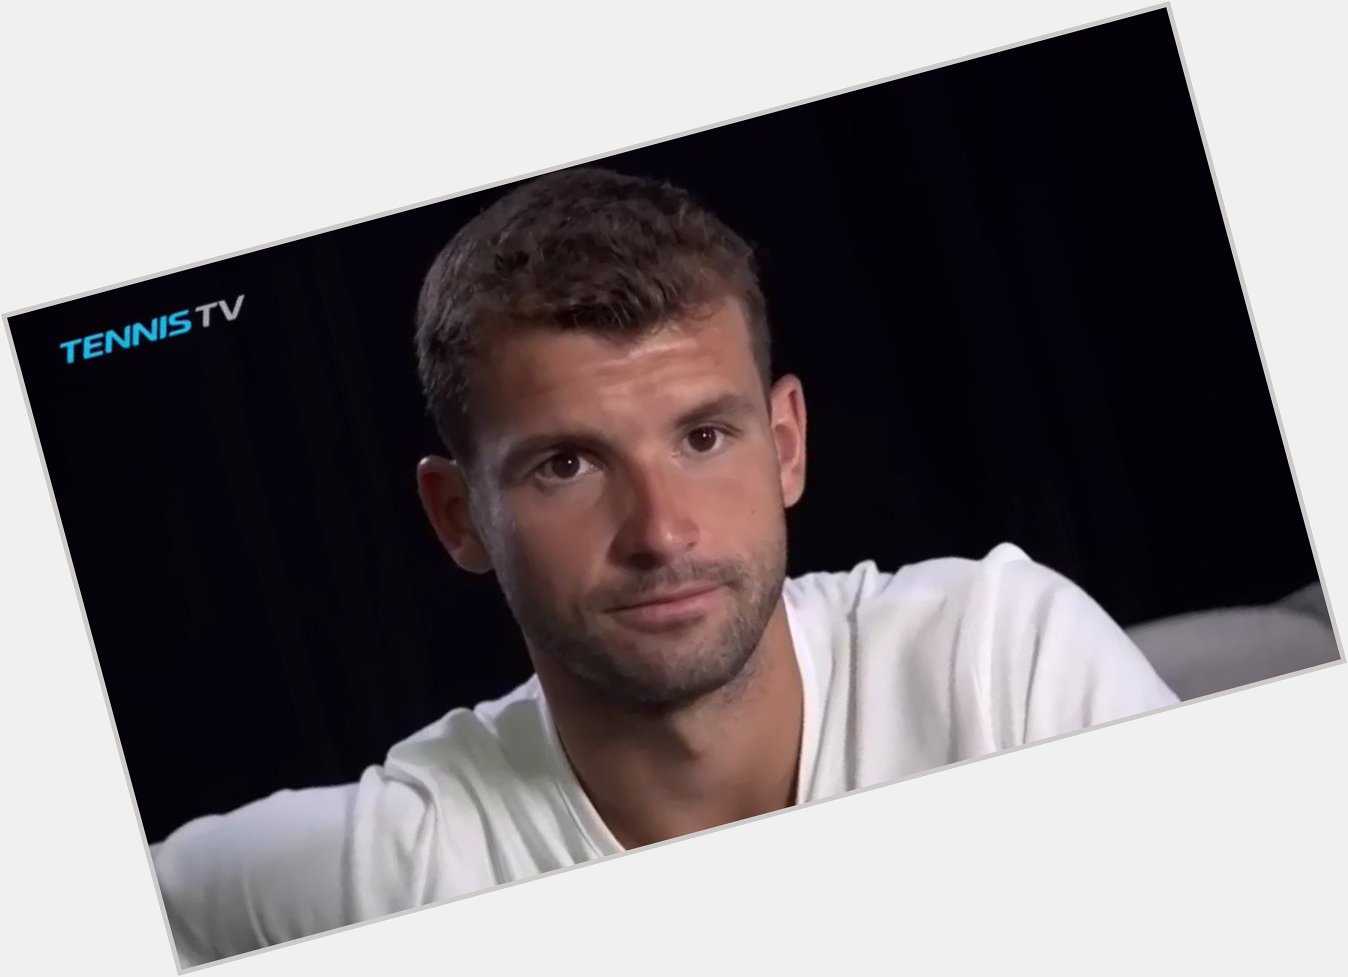 Happy 30th birthday to the best looking guy on tour  , grigor dimitrov! : tennis tv 